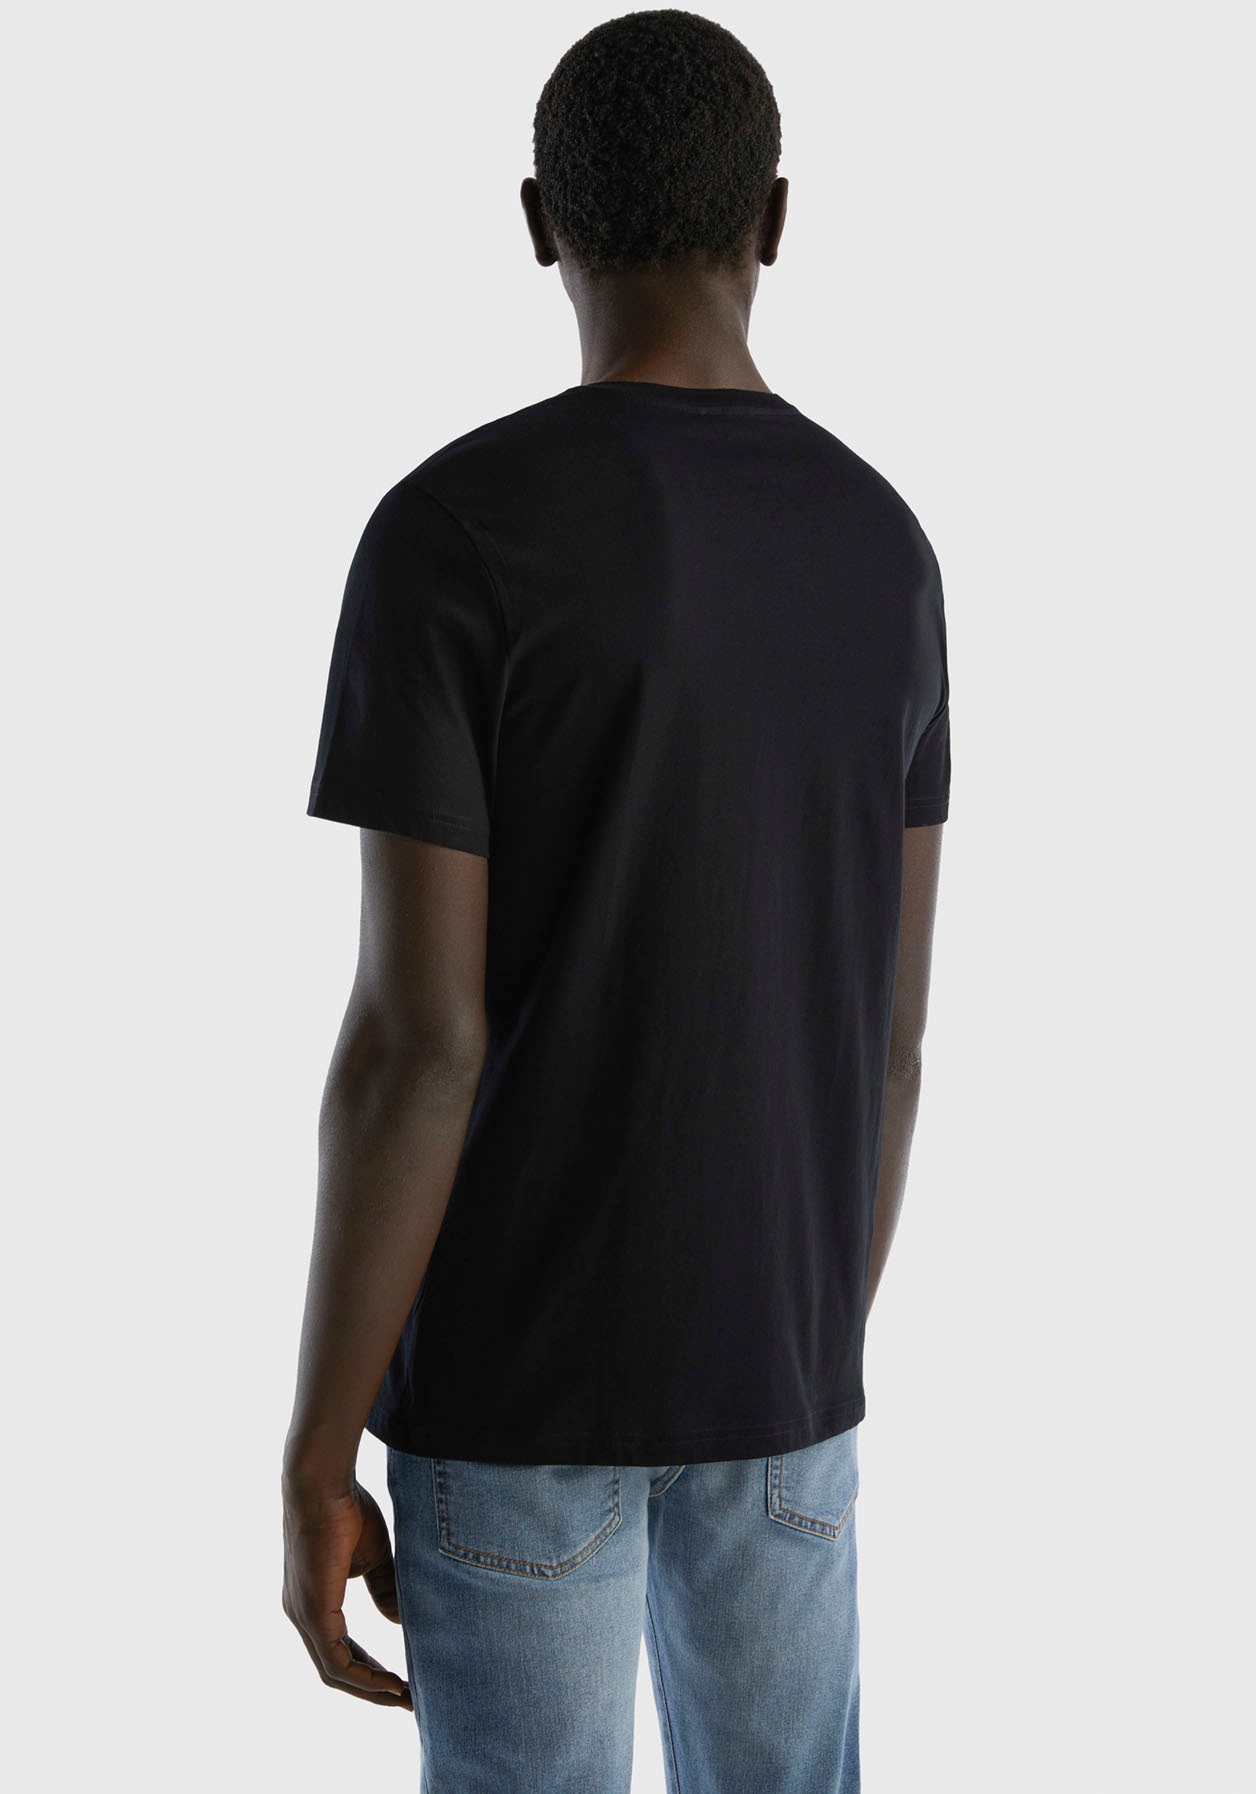 United Colors Benetton in of cleaner Basic-Form T-Shirt, online shoppen bei OTTO